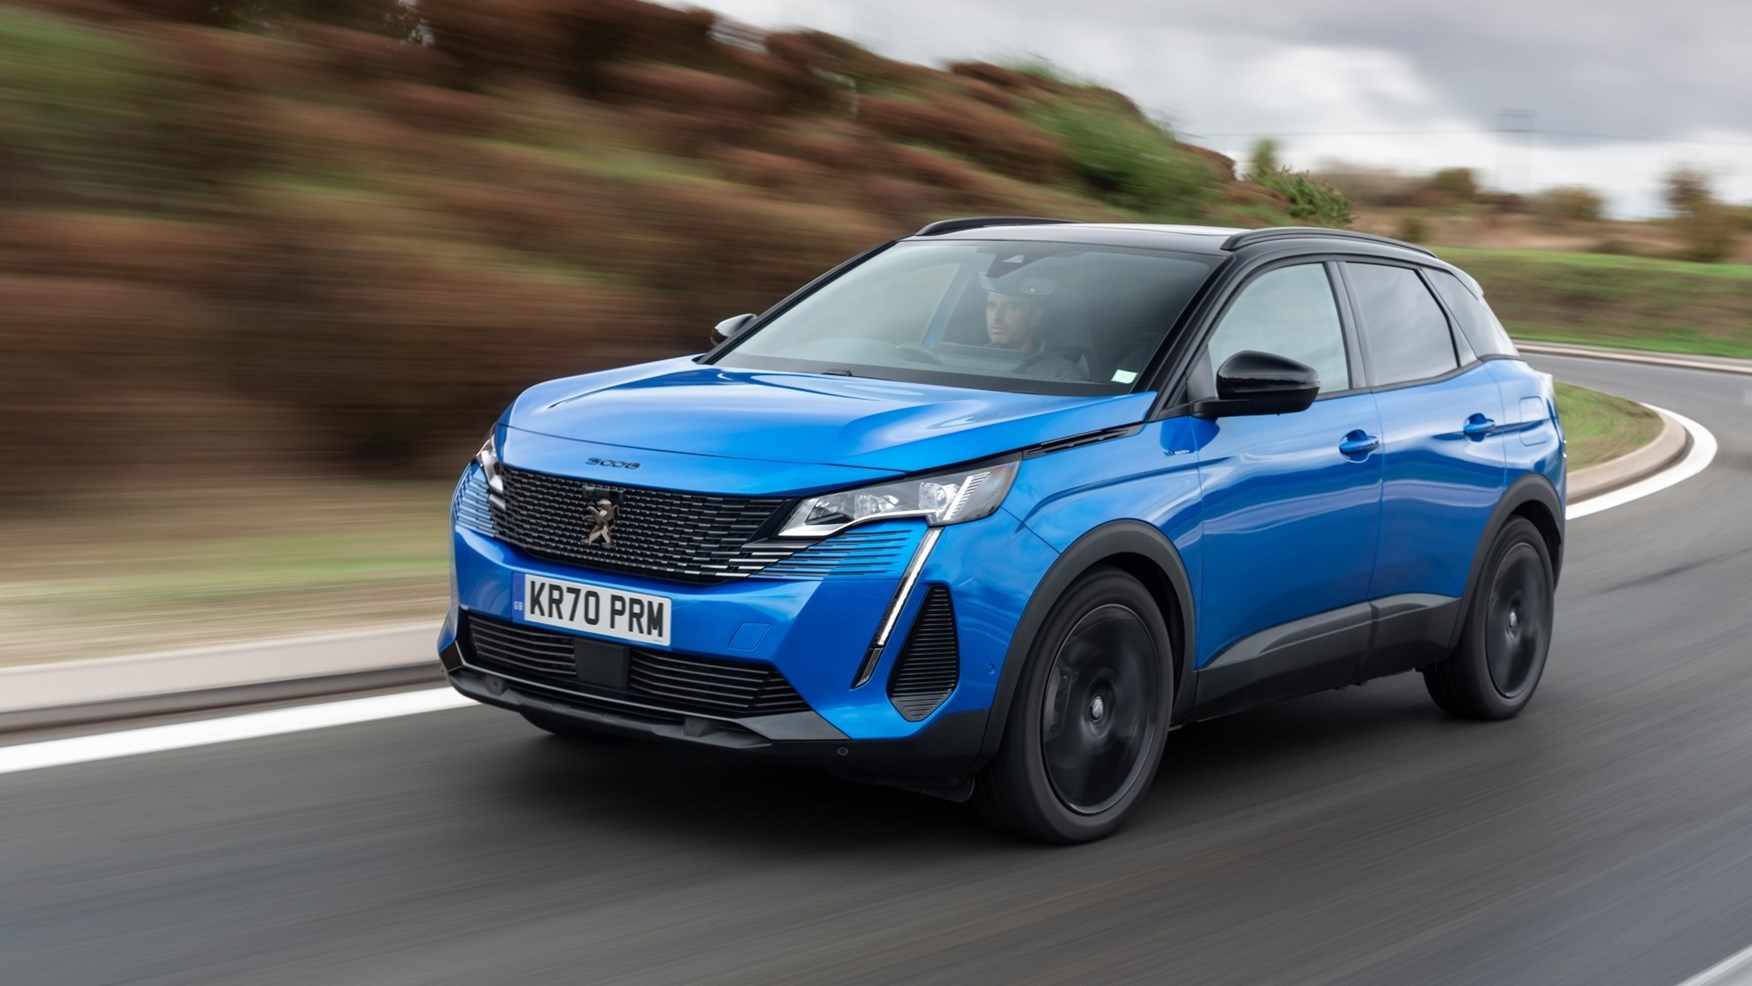 Peugeot 3008 review - prices, specs and 0-60 time